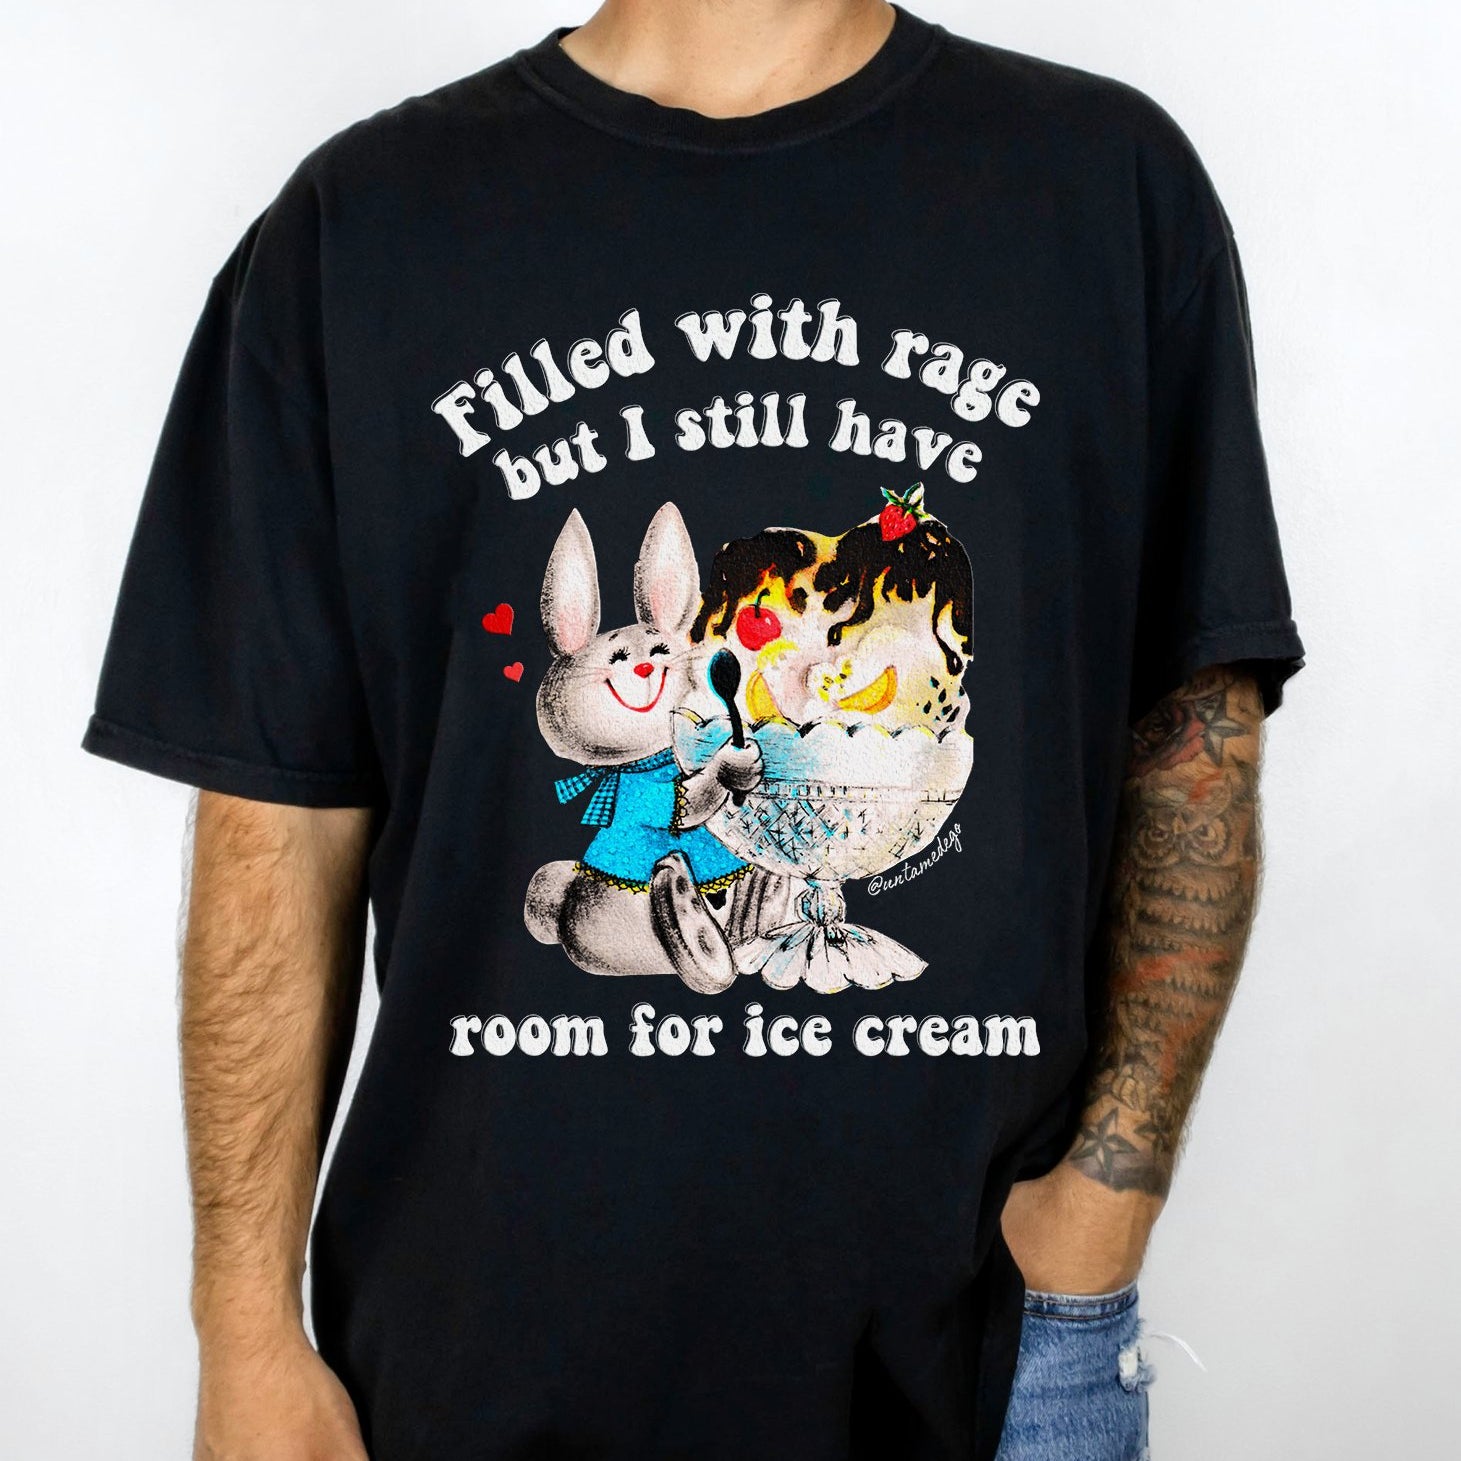 Filled With Rage But I Still Have Room For Ice Cream Mens Tee - UntamedEgo LLC.